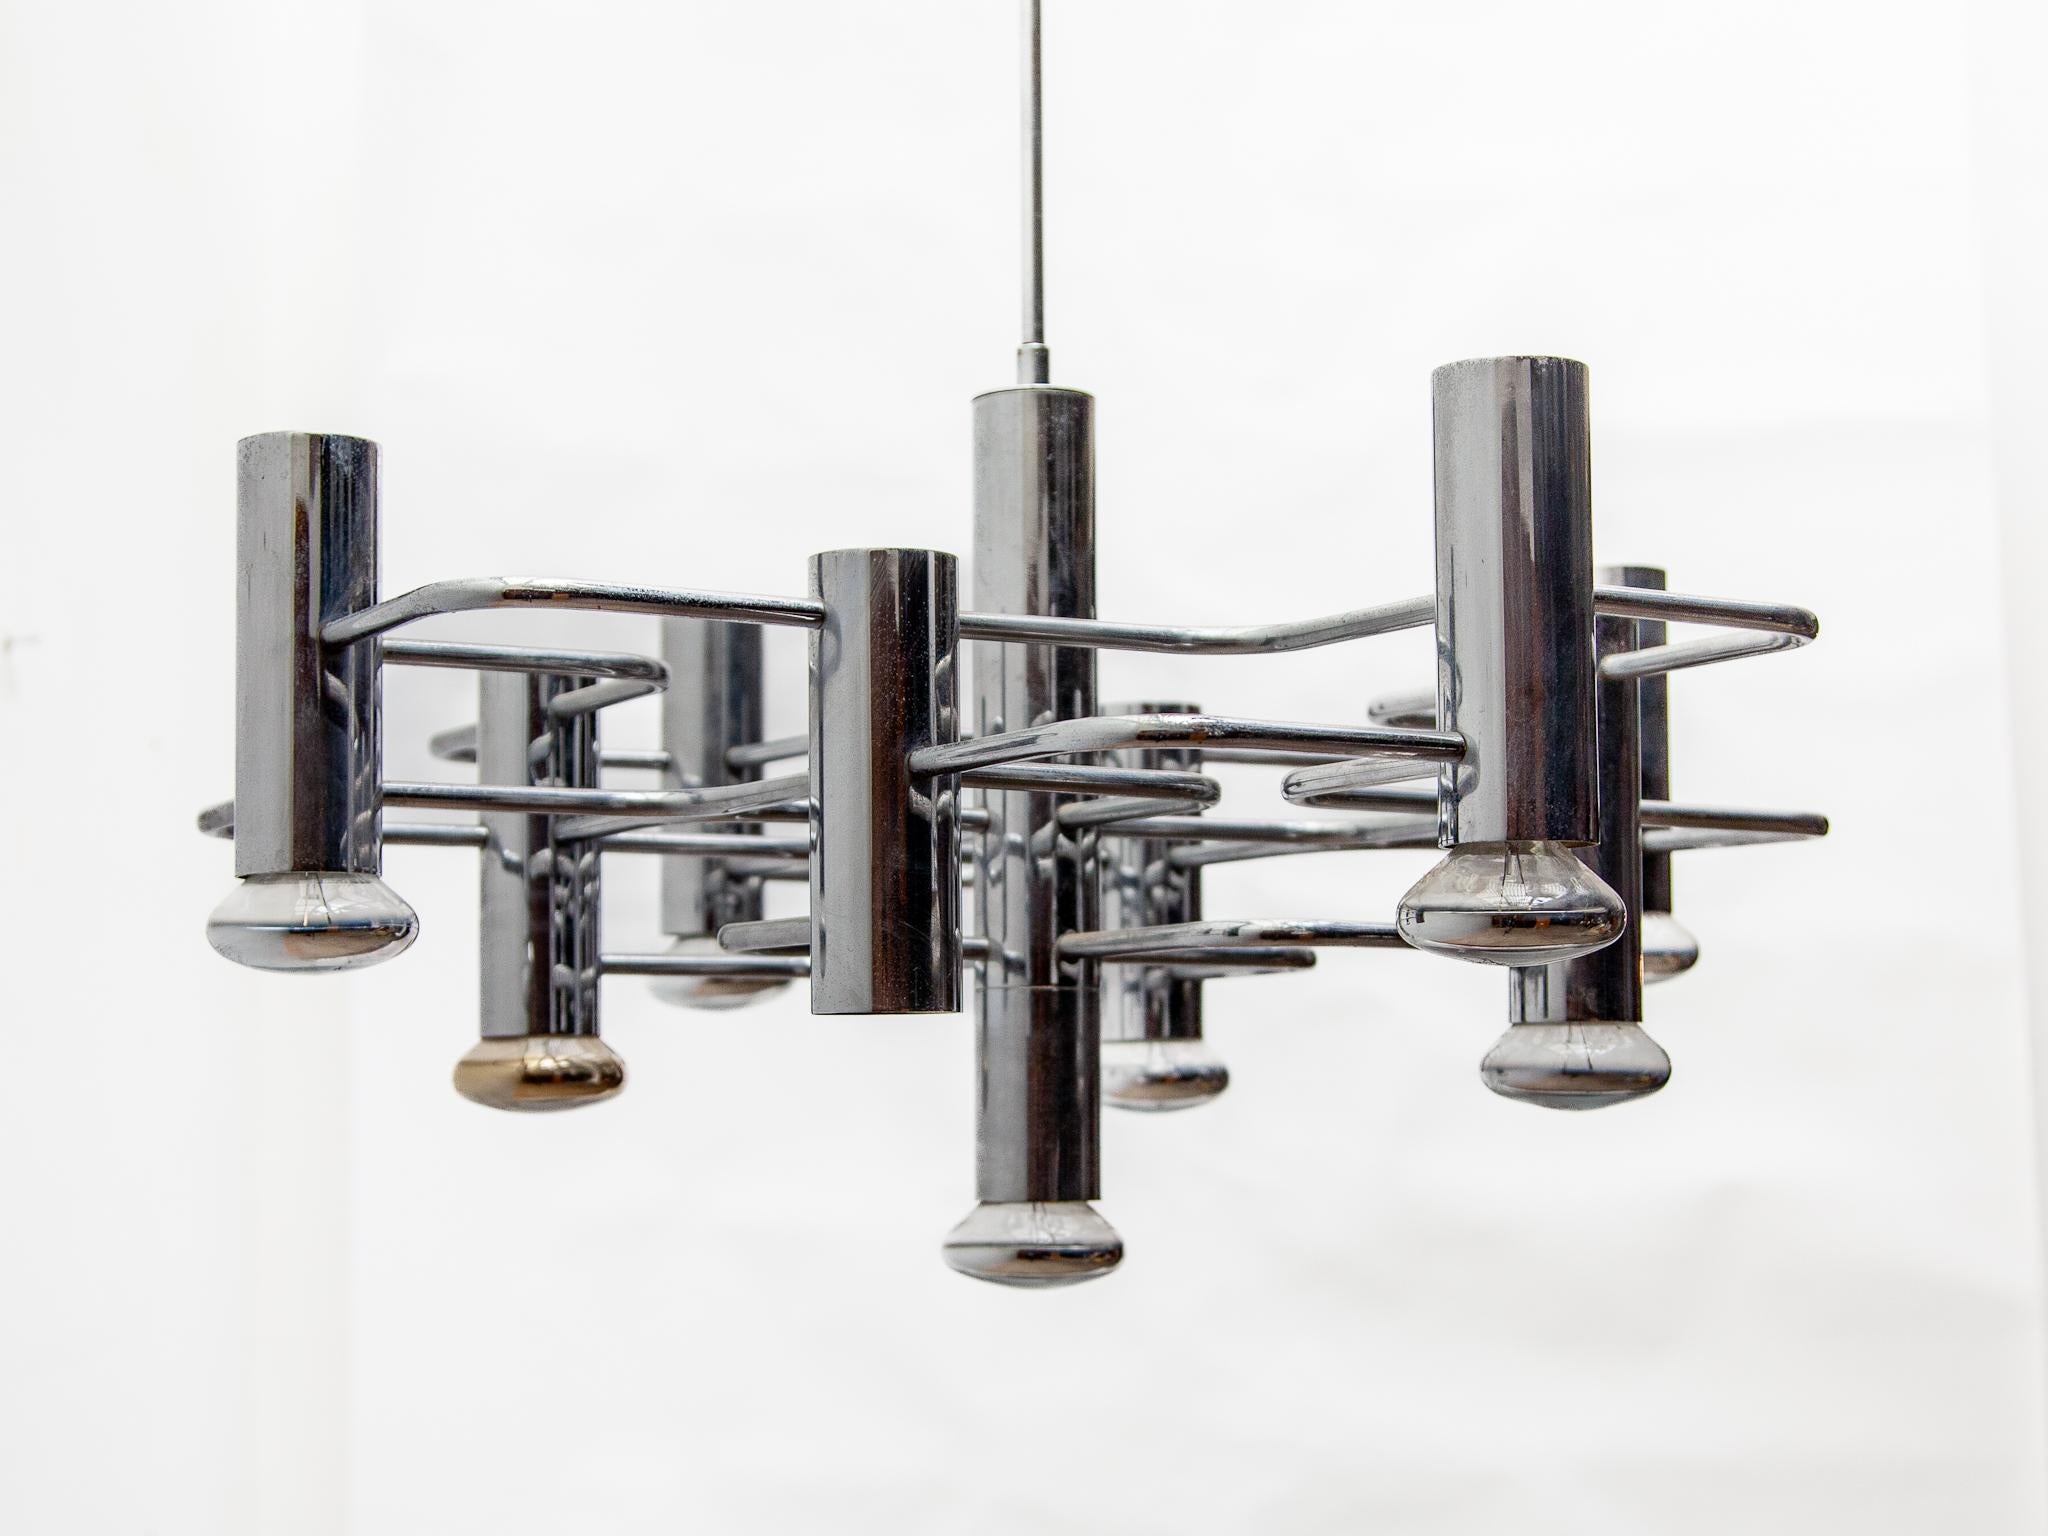 Chrome Italian chandelier design by Gaetano Sciolari 1960s. Geometric metal chromed structure with 13 lights. The chandelier remains in very good vintage condition with normal patina. 